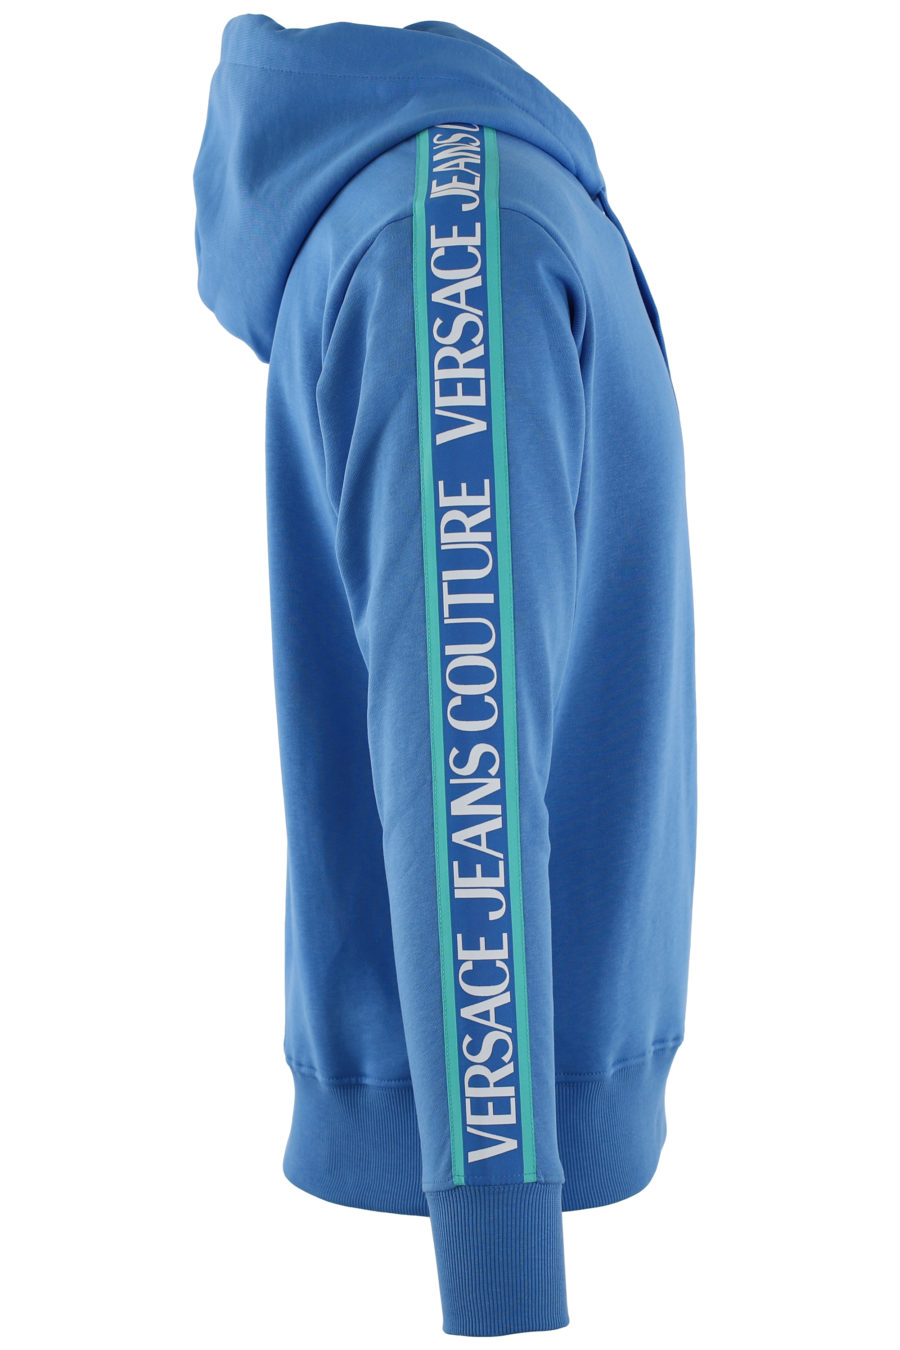 Blue sweatshirt with hood and blue ribbon with logo - IMG 0456